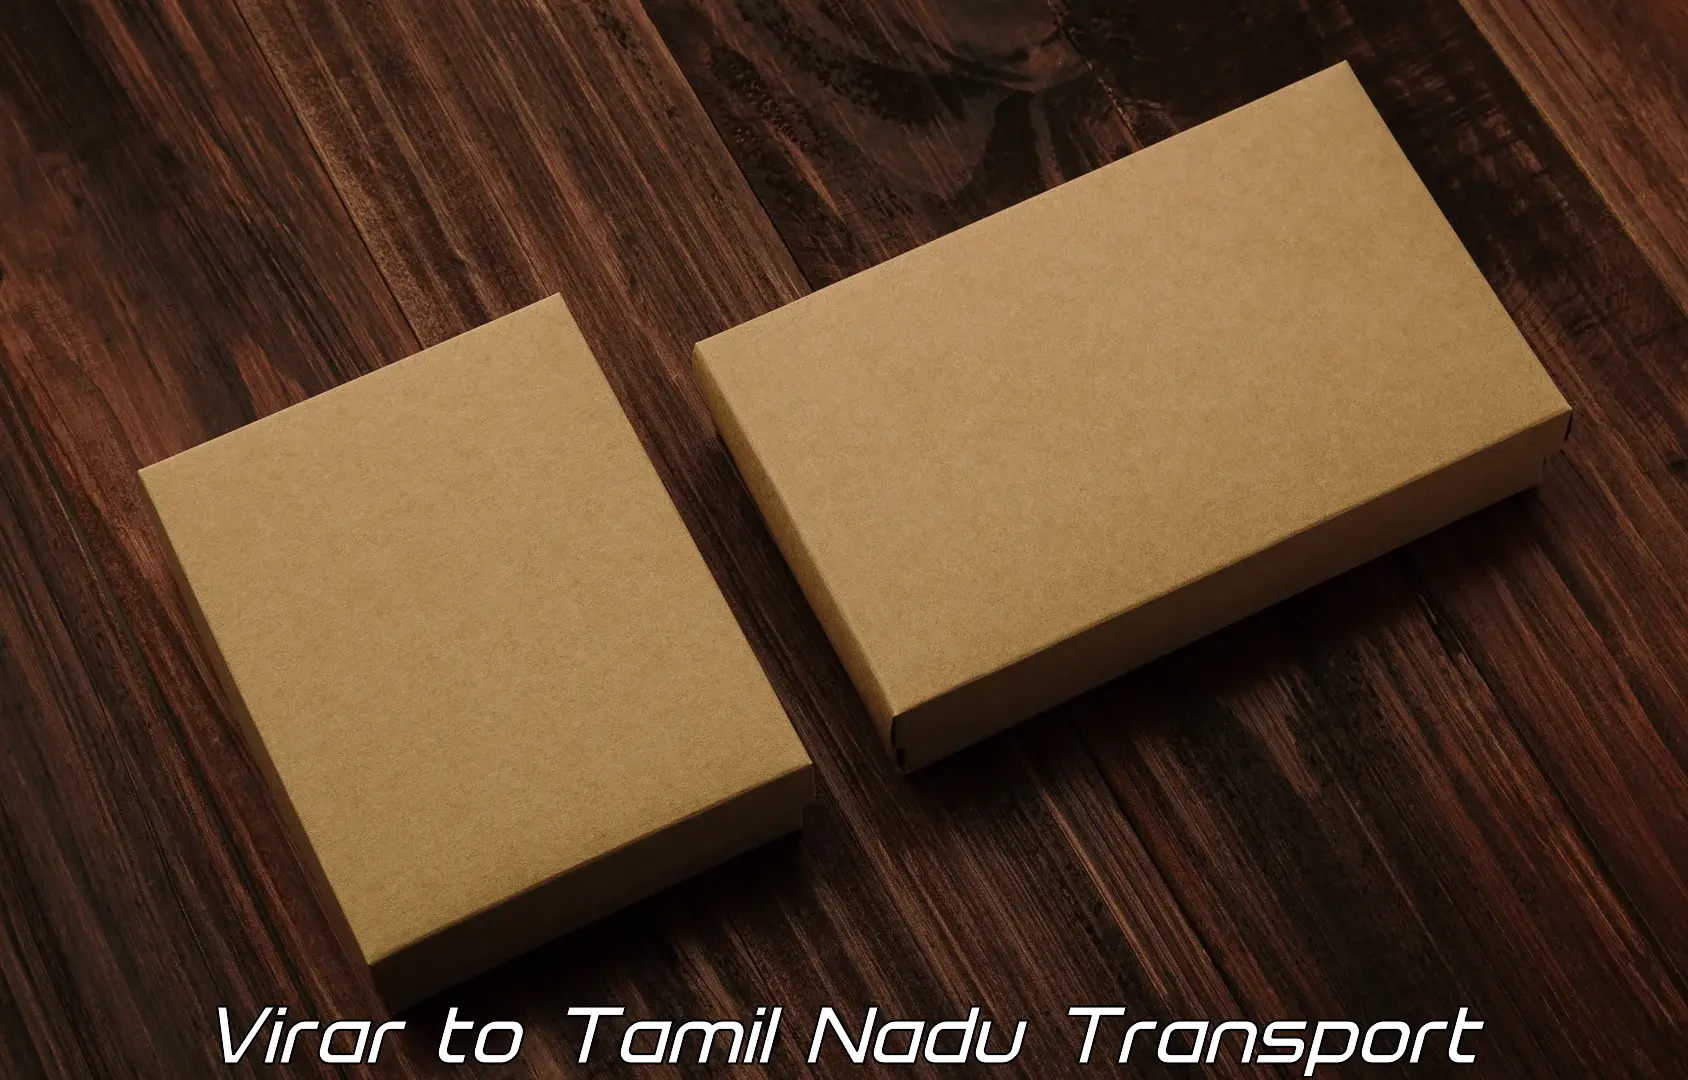 Nearby transport service Virar to Omalur